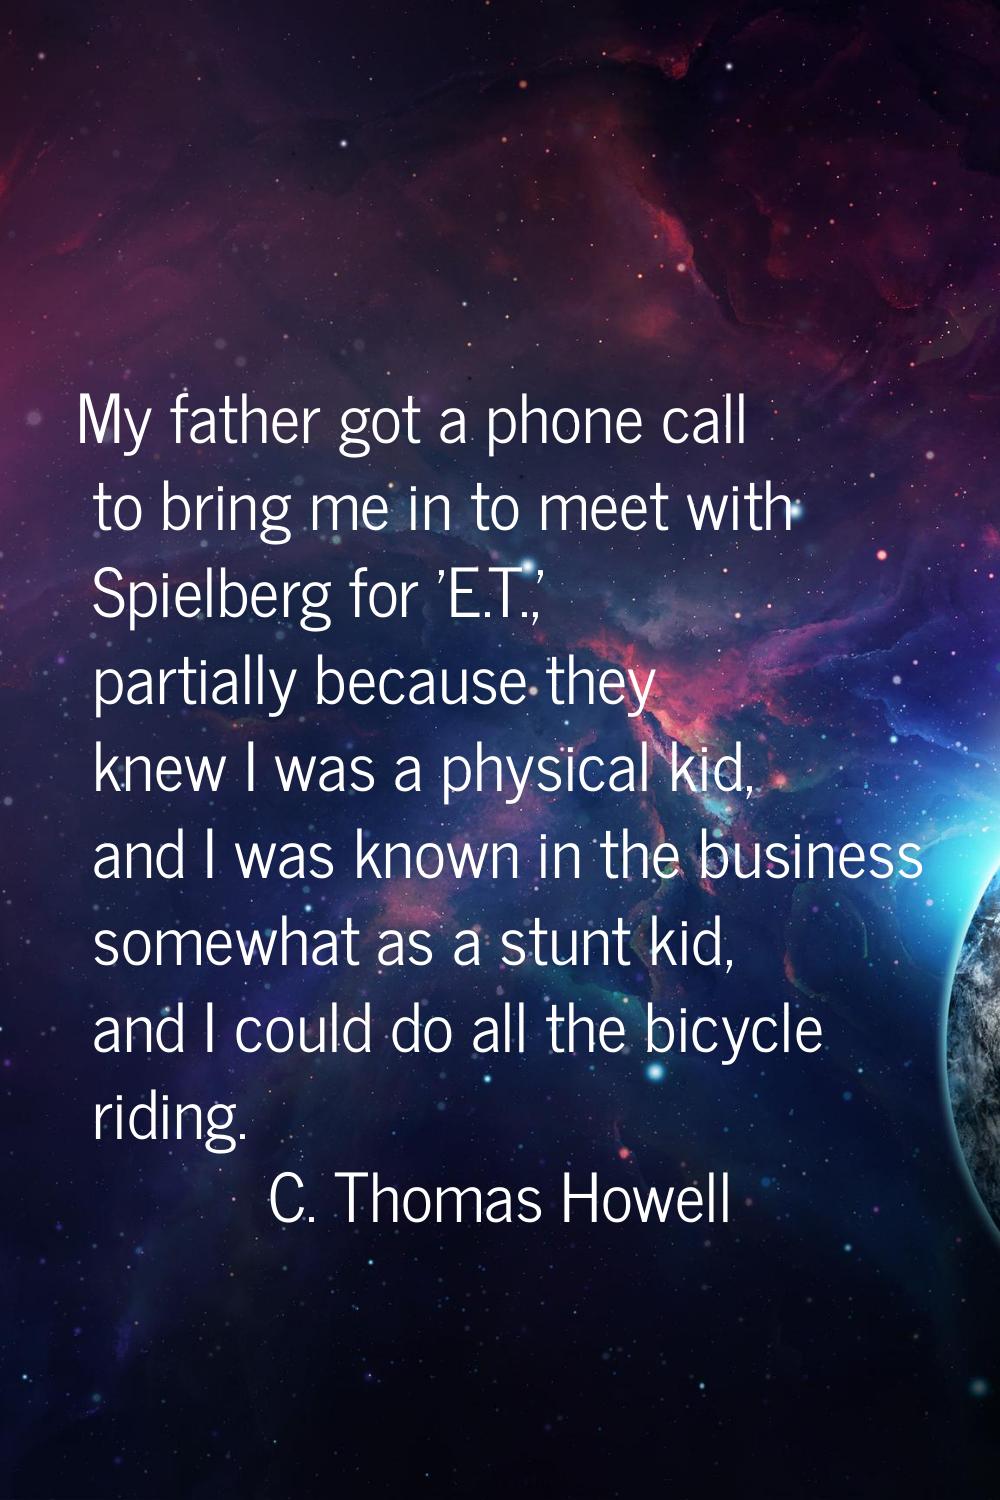 My father got a phone call to bring me in to meet with Spielberg for 'E.T.,' partially because they